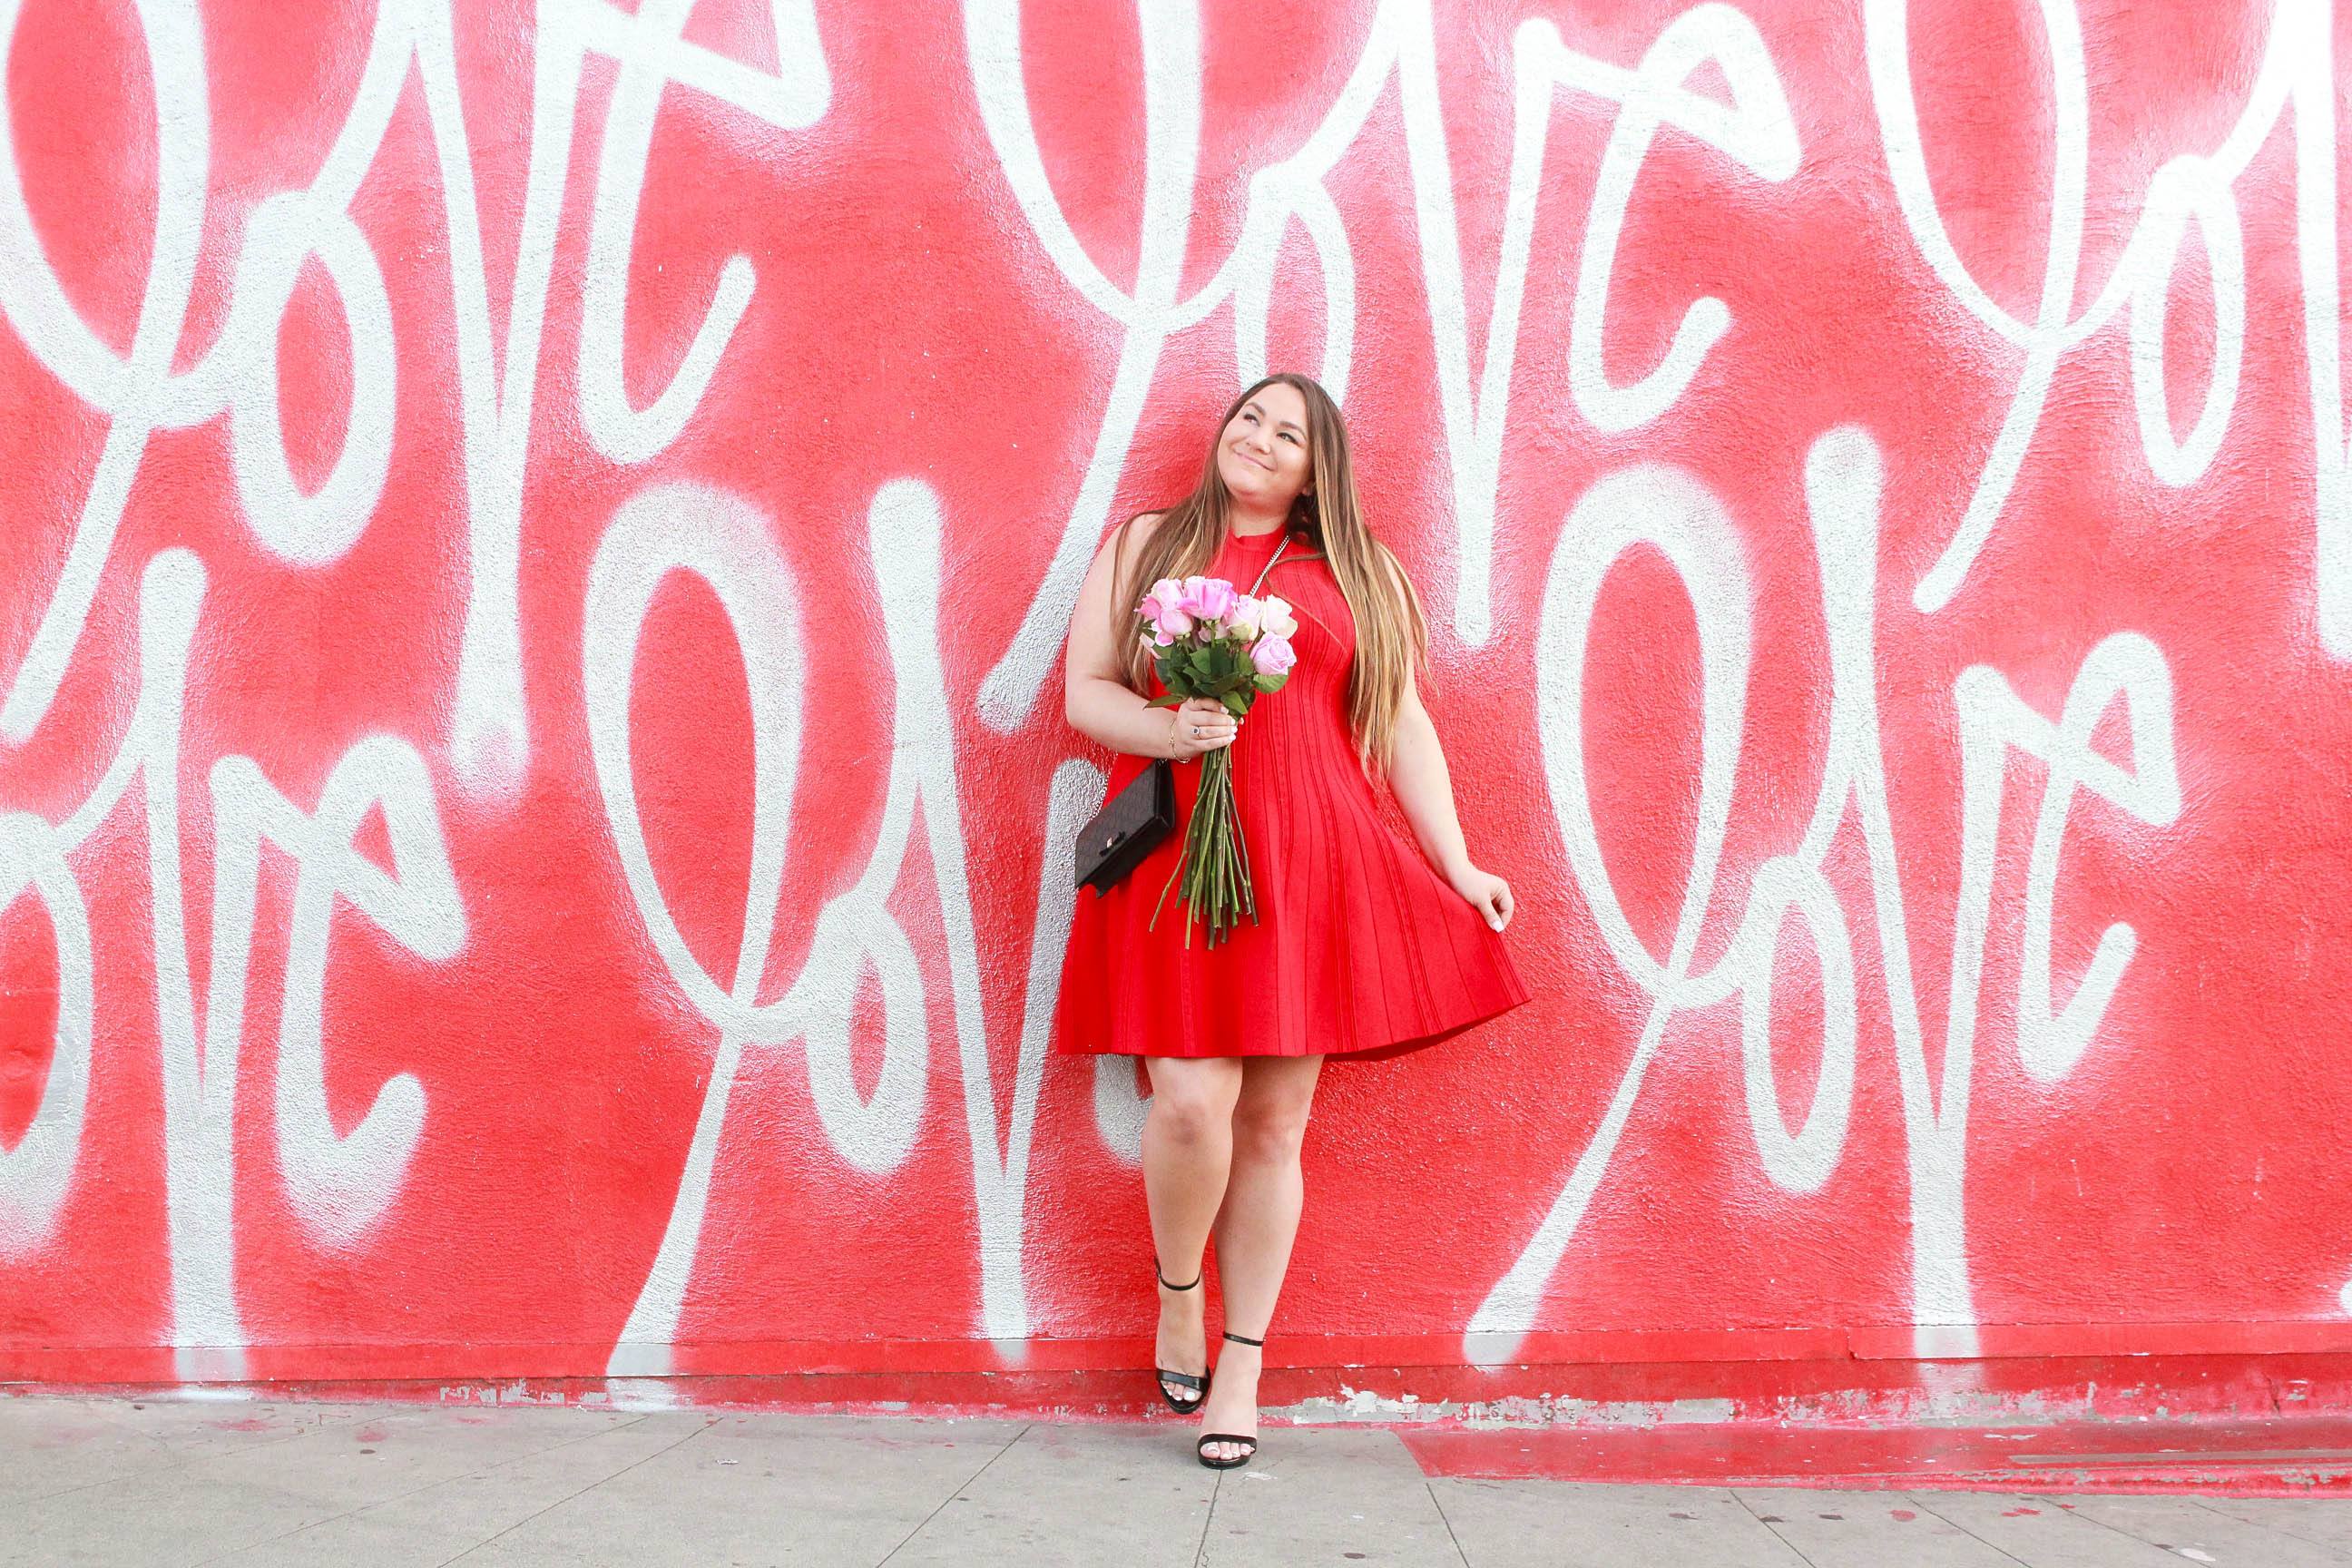 missyonmadison, missyonmadison instagram, melissa tierney, melissa tierney instagram, valentines day, valentines day 2018, valentines day date night, date night outfit, date night look, valentines day 2018 look, valentines day 2018 outfit, date night style, date night look, what to wear for valentines day, little red dress, red fit and flare dress, red sleeveless dress, black ankle strap heels, black ankle strap sandals, gucci mini bag, black gucci mini bag, fashion blogger, style blogger, style blog, date night looks, fresh roses, love wall culver city, love wall, love wall LA,